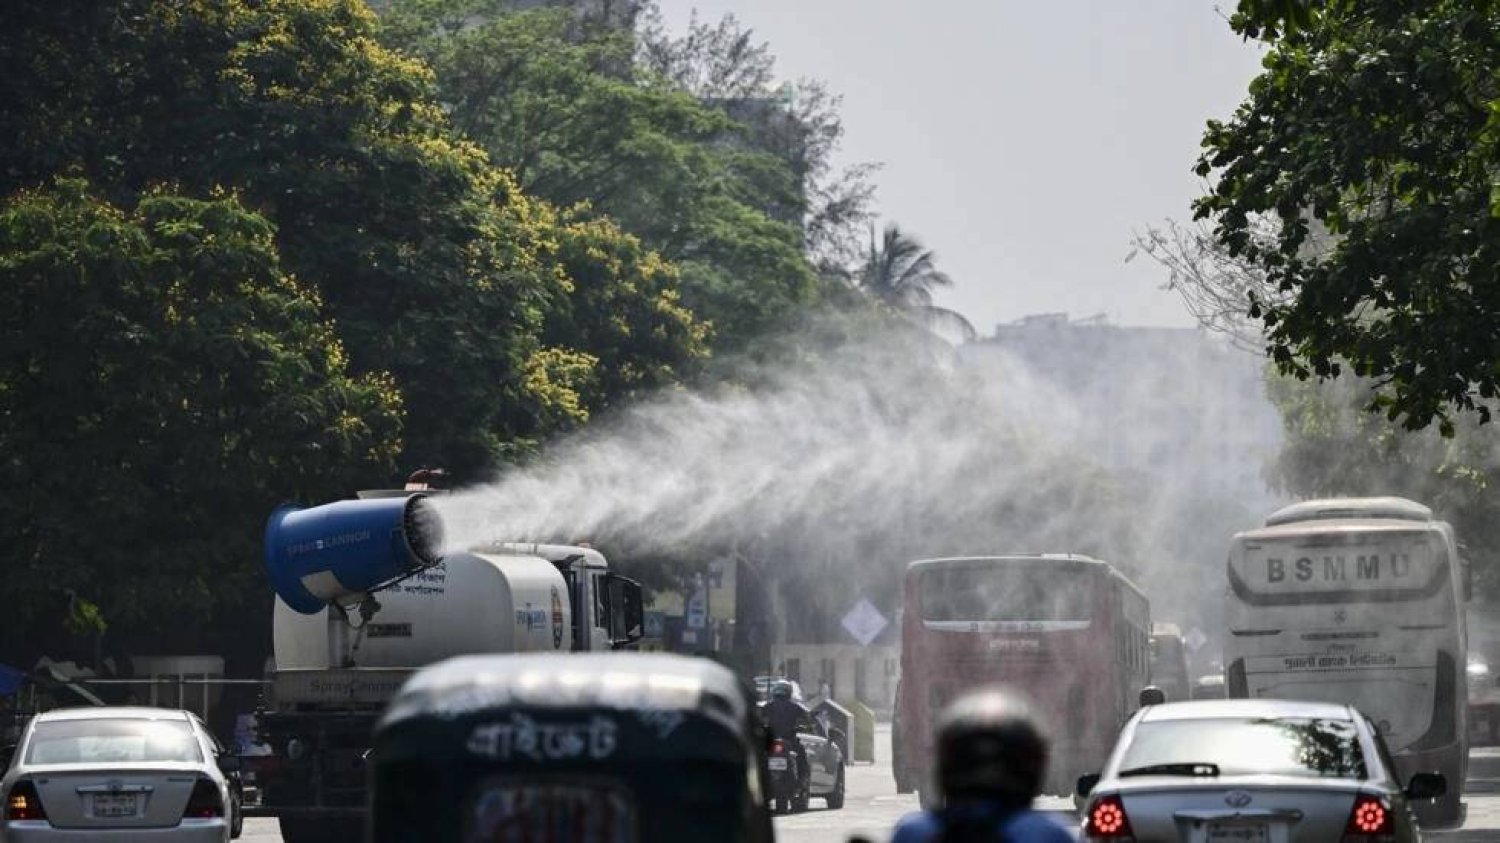 A vehicle of the Dhaka North City Corporation sprays water along a busy road to lower the temperature amidst a heatwave. MUNIR UZ ZAMAN / AFP
